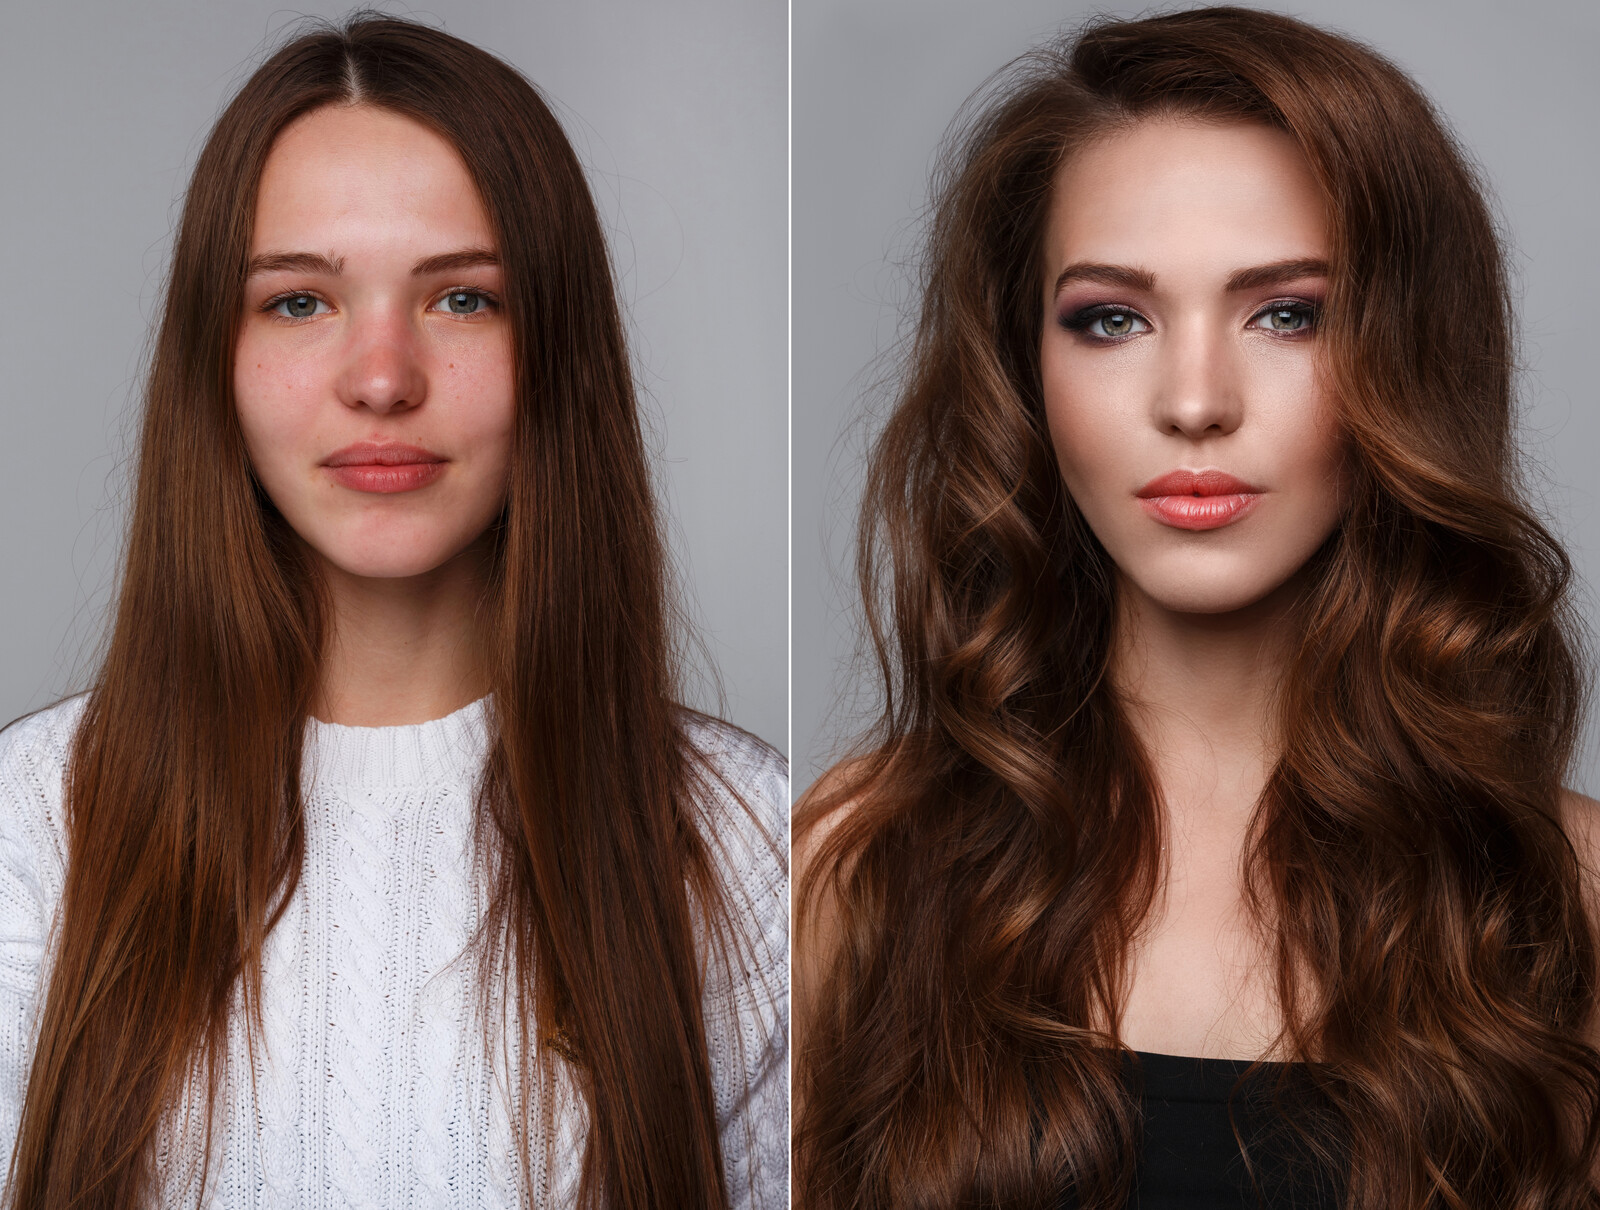 woman before and after photoshoot and photoshop